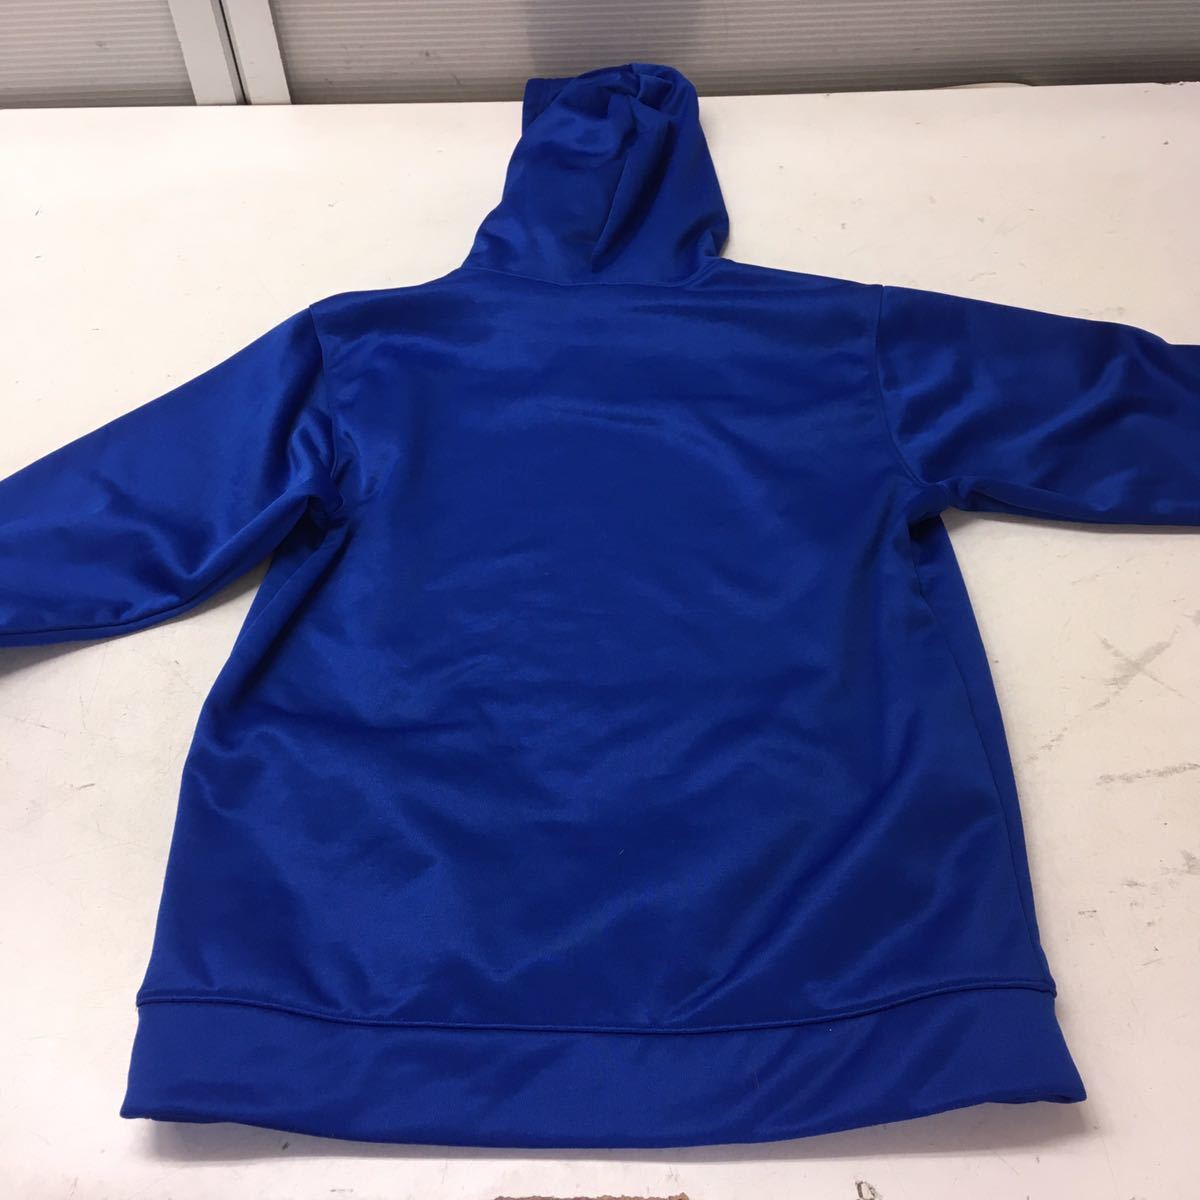  free shipping *UNDER ARMOUR Under Armor * parka with a raised back reverse side nappy pull over *YXL Junior child #50328sbq